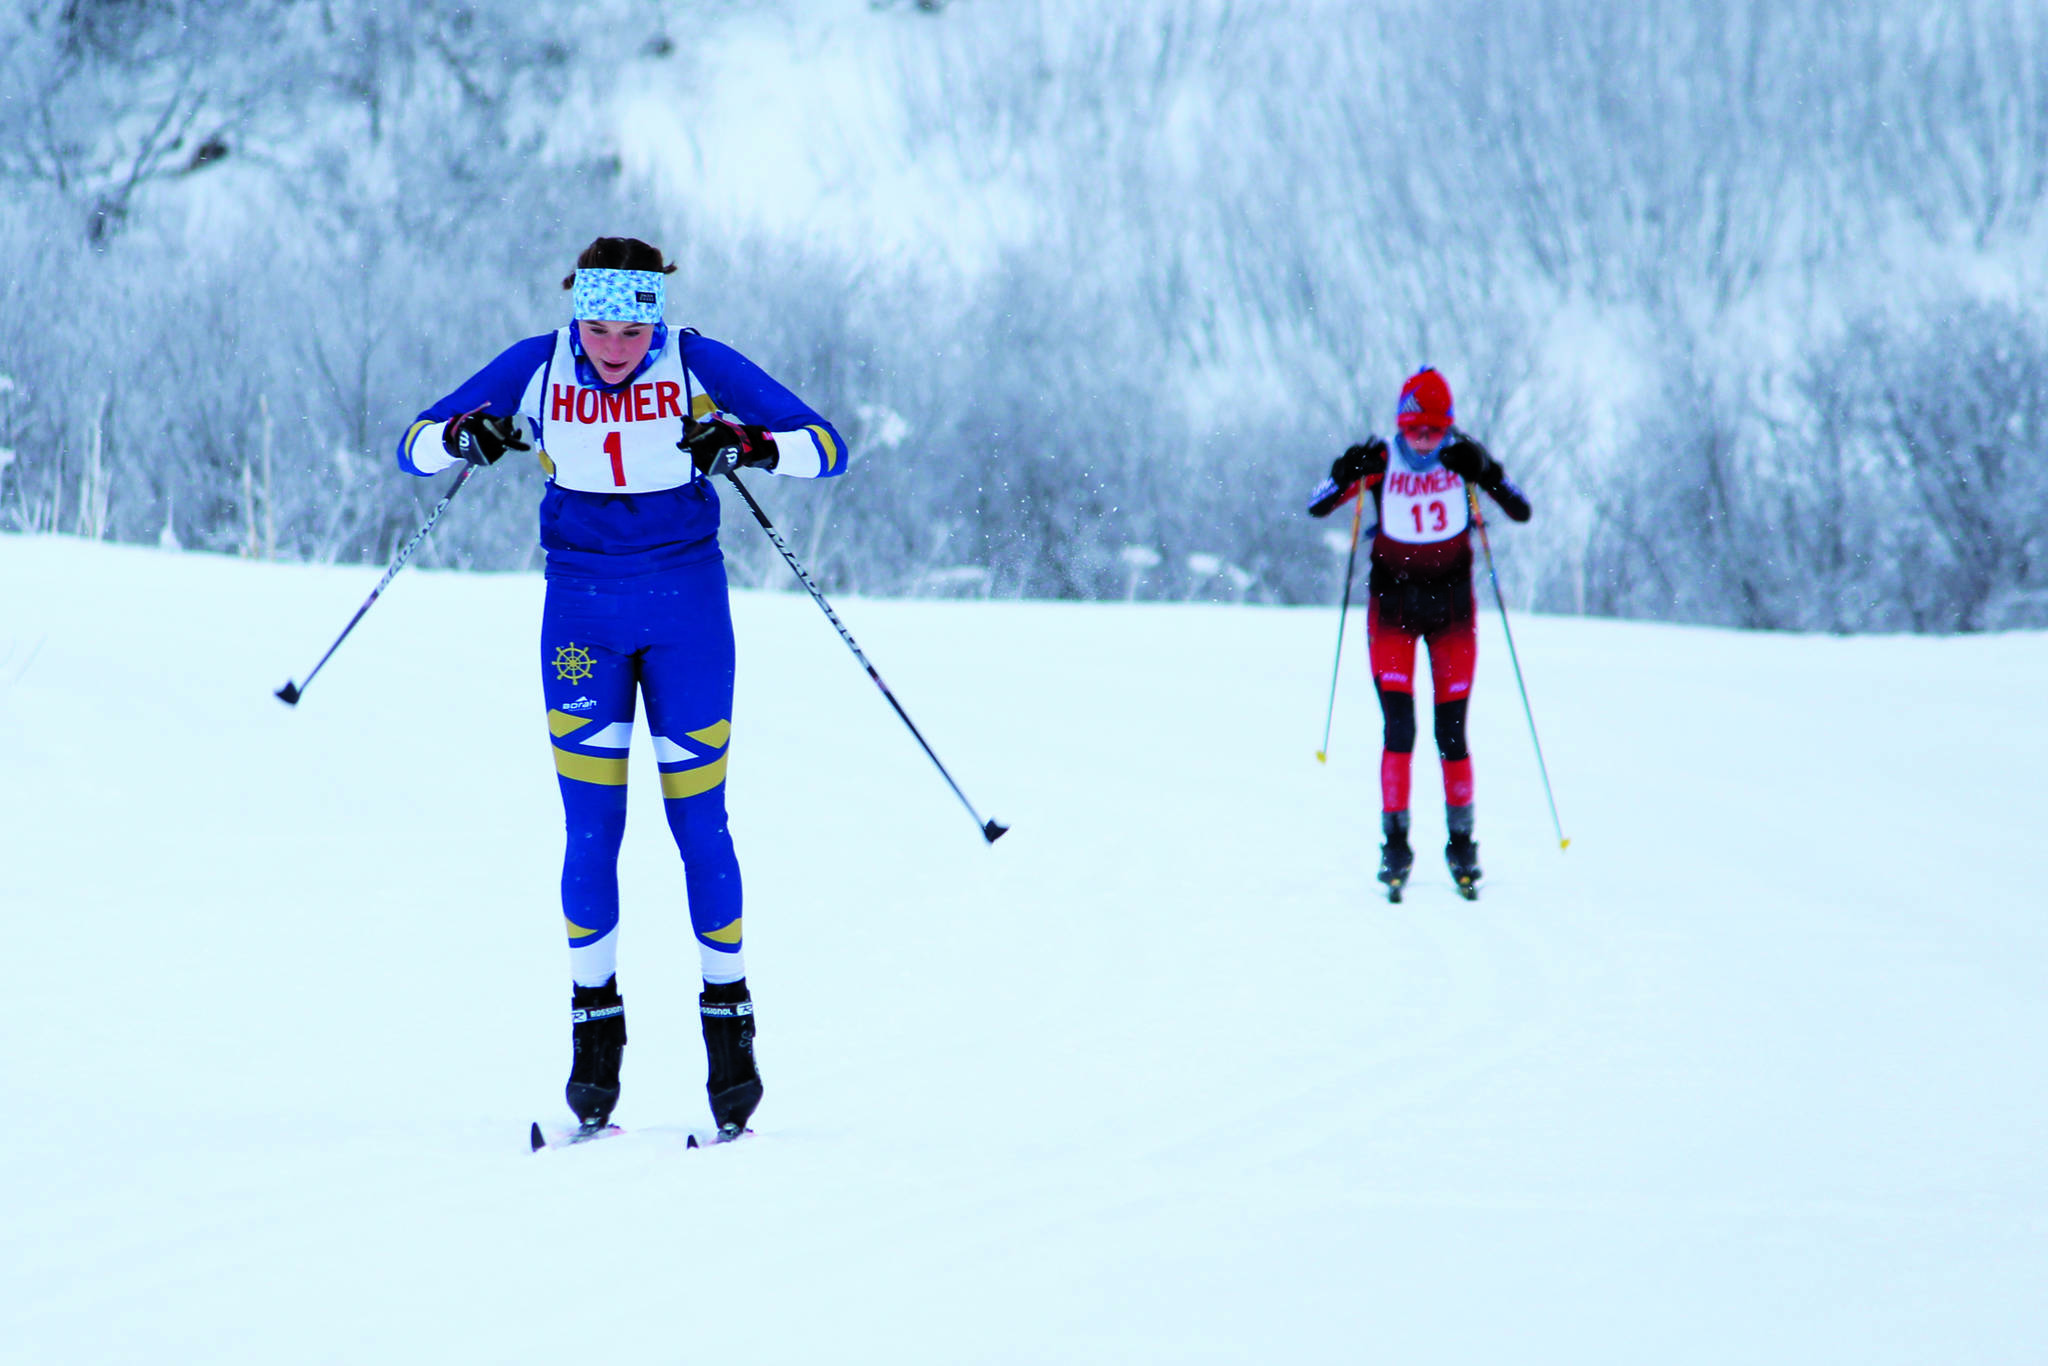 Homer’s Autumn Daigle skis to the finish of a Friday, Jan. 31, 2020 classic ski race ahead of Kenai’s Jayna Boonstra during the Homer Invite at the Lookout Mountain Trails on Ohlson Mountain Road near Homer, Alaska. (Photo by Megan Pacer/Homer News)